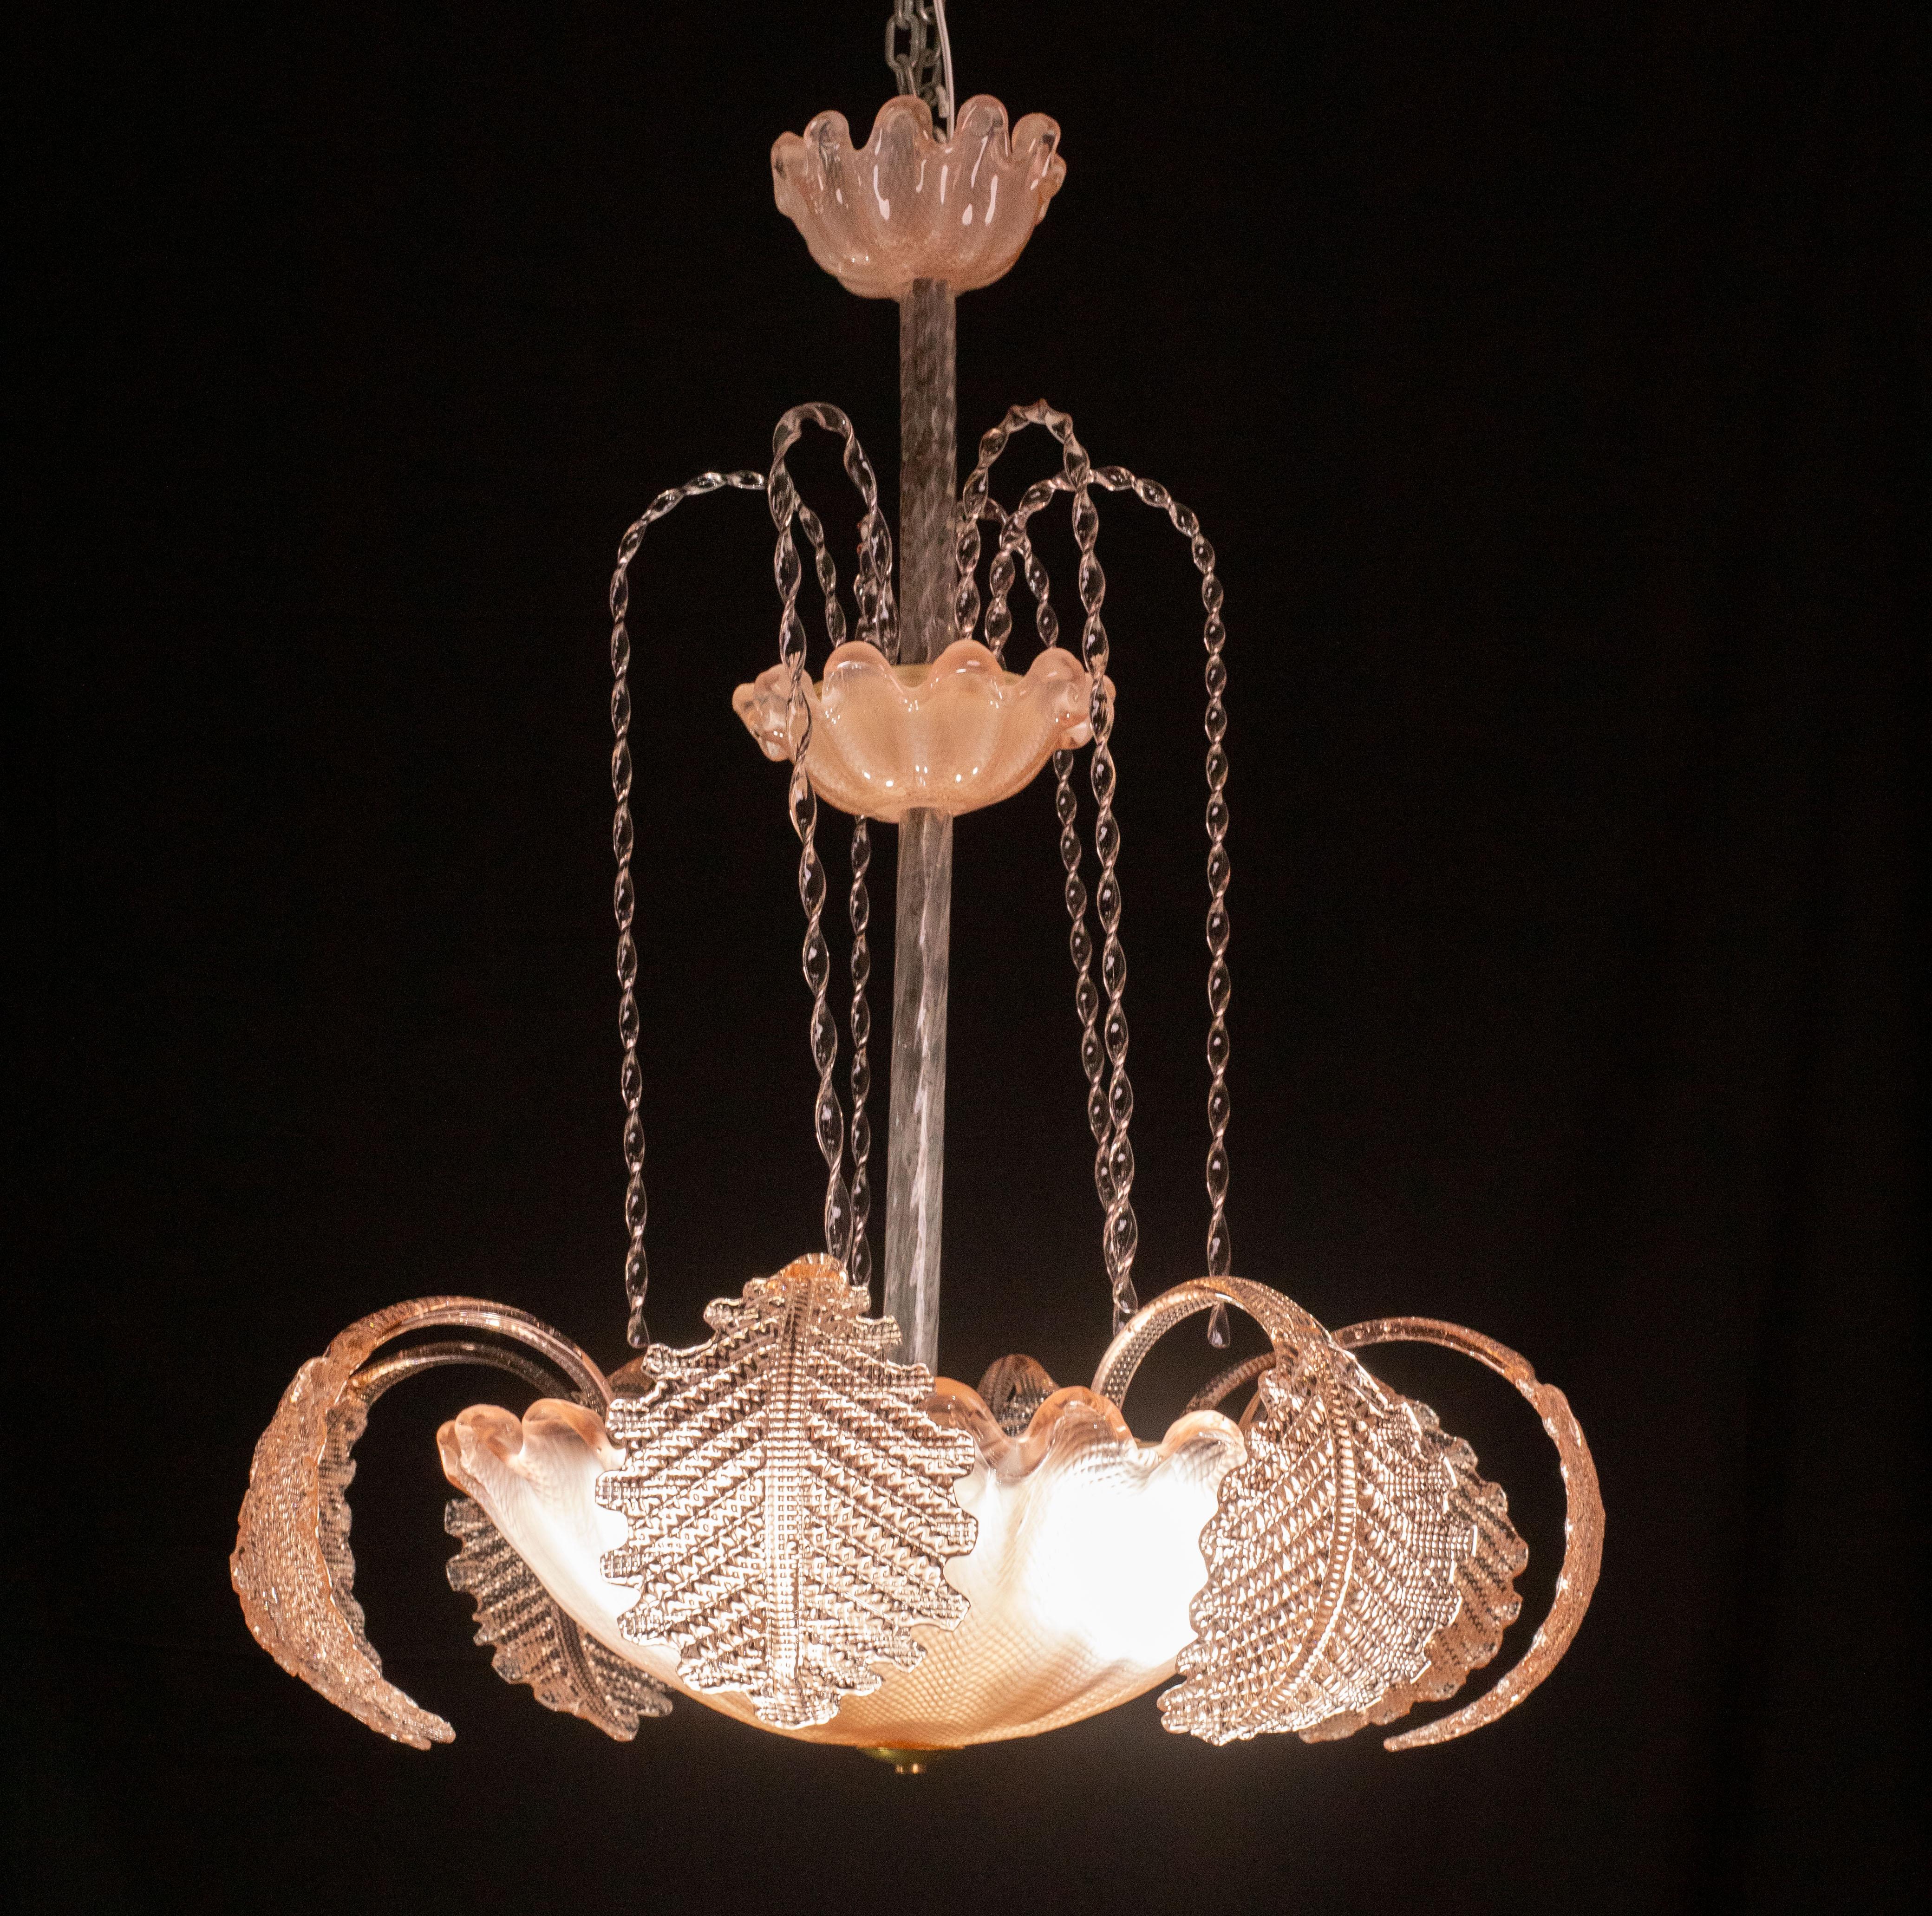 Wonderful Murano chandelier made by Barovier and Toso glassworks.

Design period: 1930s\1950s.

The chandelier consists of 8 low leaves and 6 tall glass elements cascading down, a beautiful work of glass craftsmanship.

The height measures 80